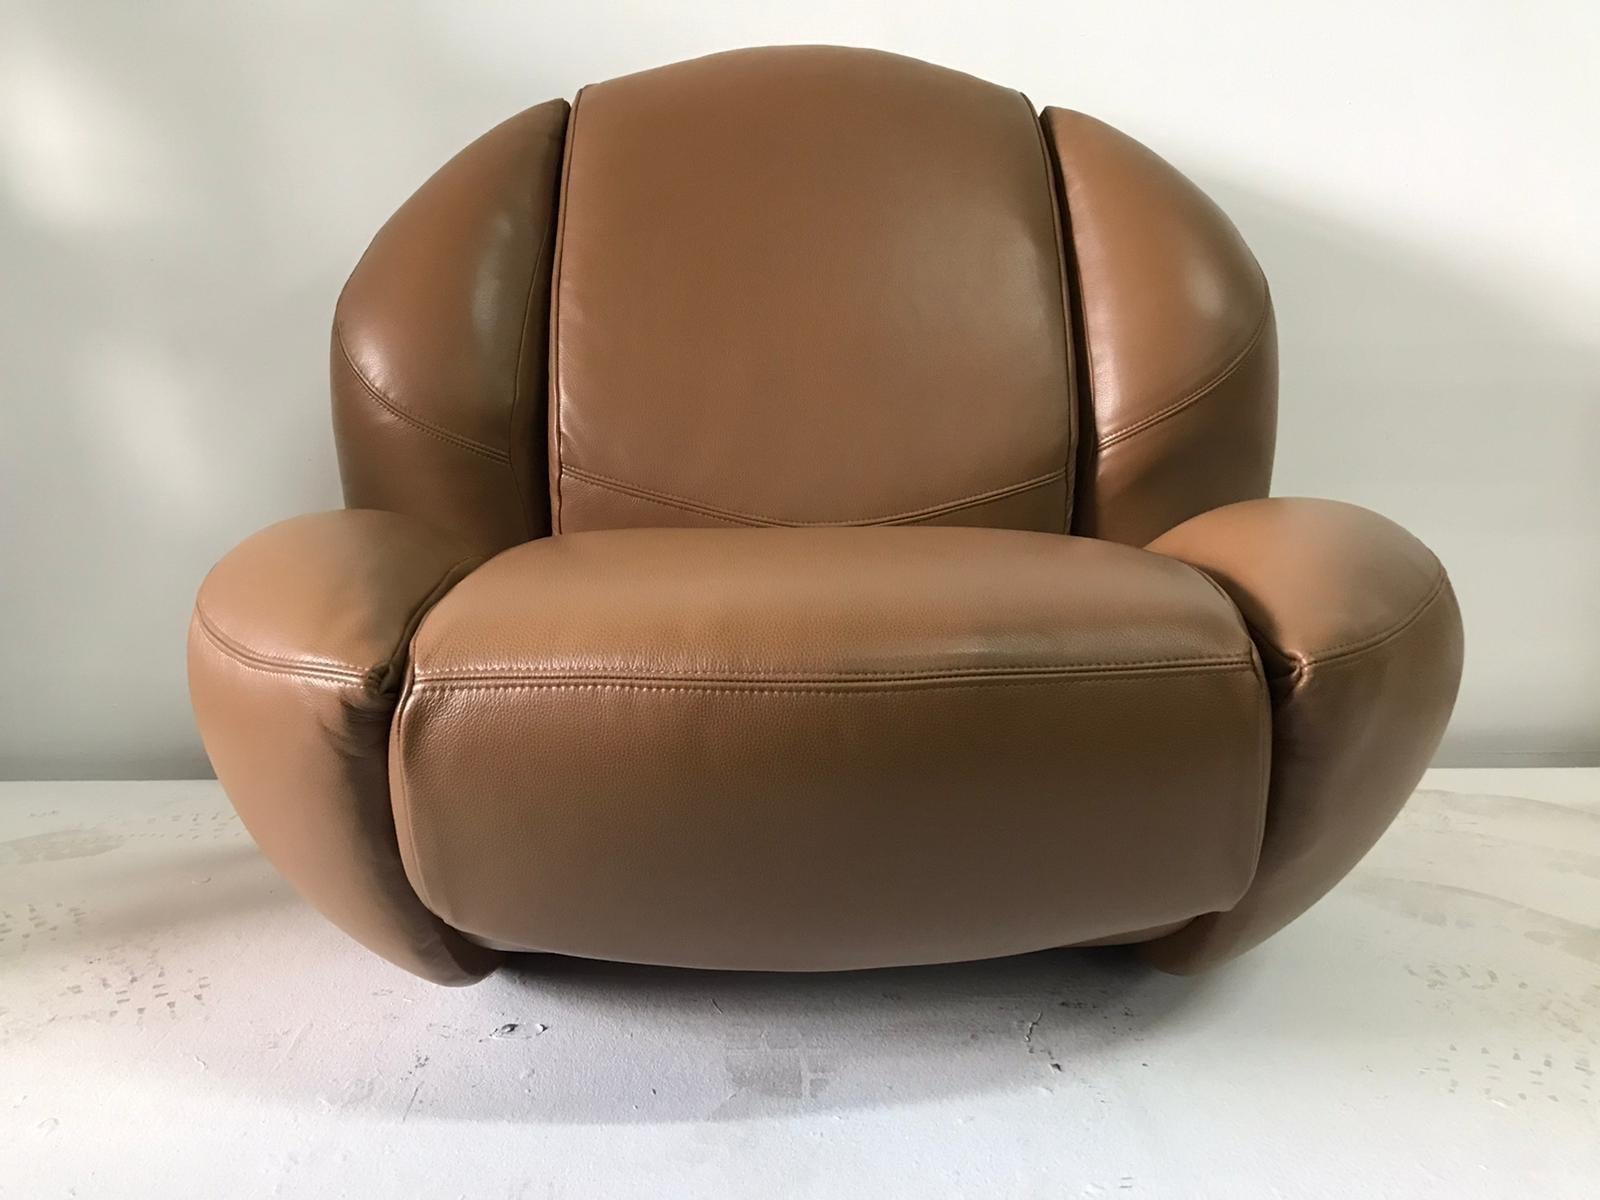 Expertly restored and reupholstered in fine leather (camel tone), this vintage 1960s unique and sculptural Italian chair by Comfortline, Italia rocks and sits adults comfortably. Original label retained.

Note: We recommend this chair sits on a